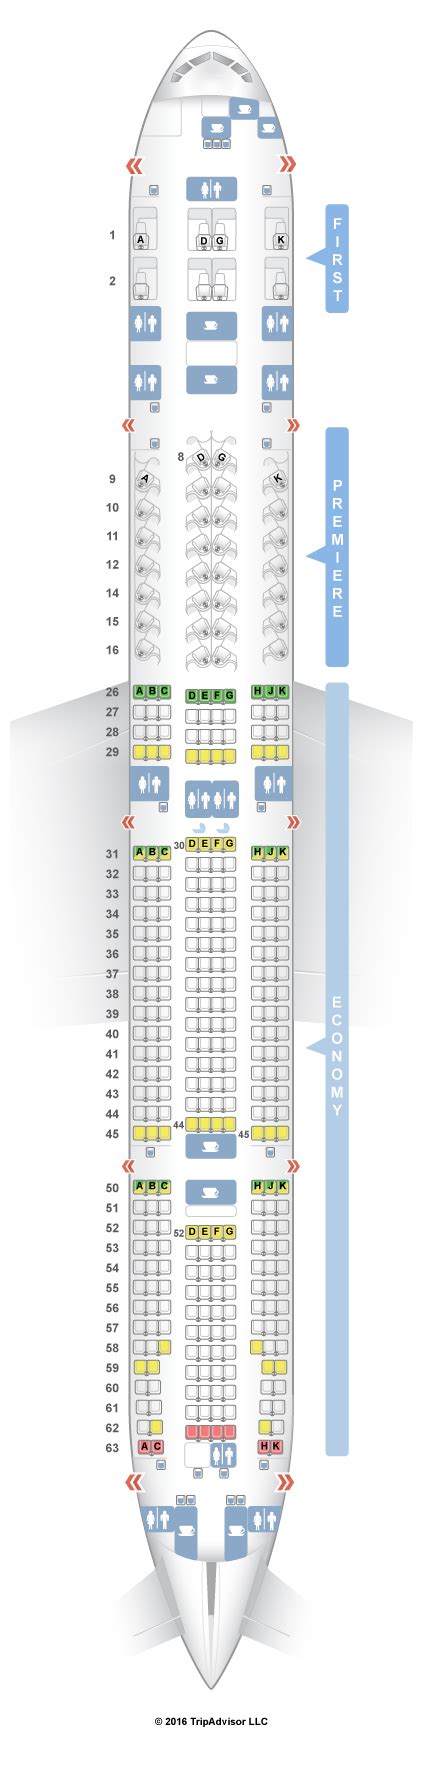 boeing 777-300er wide-body seat map